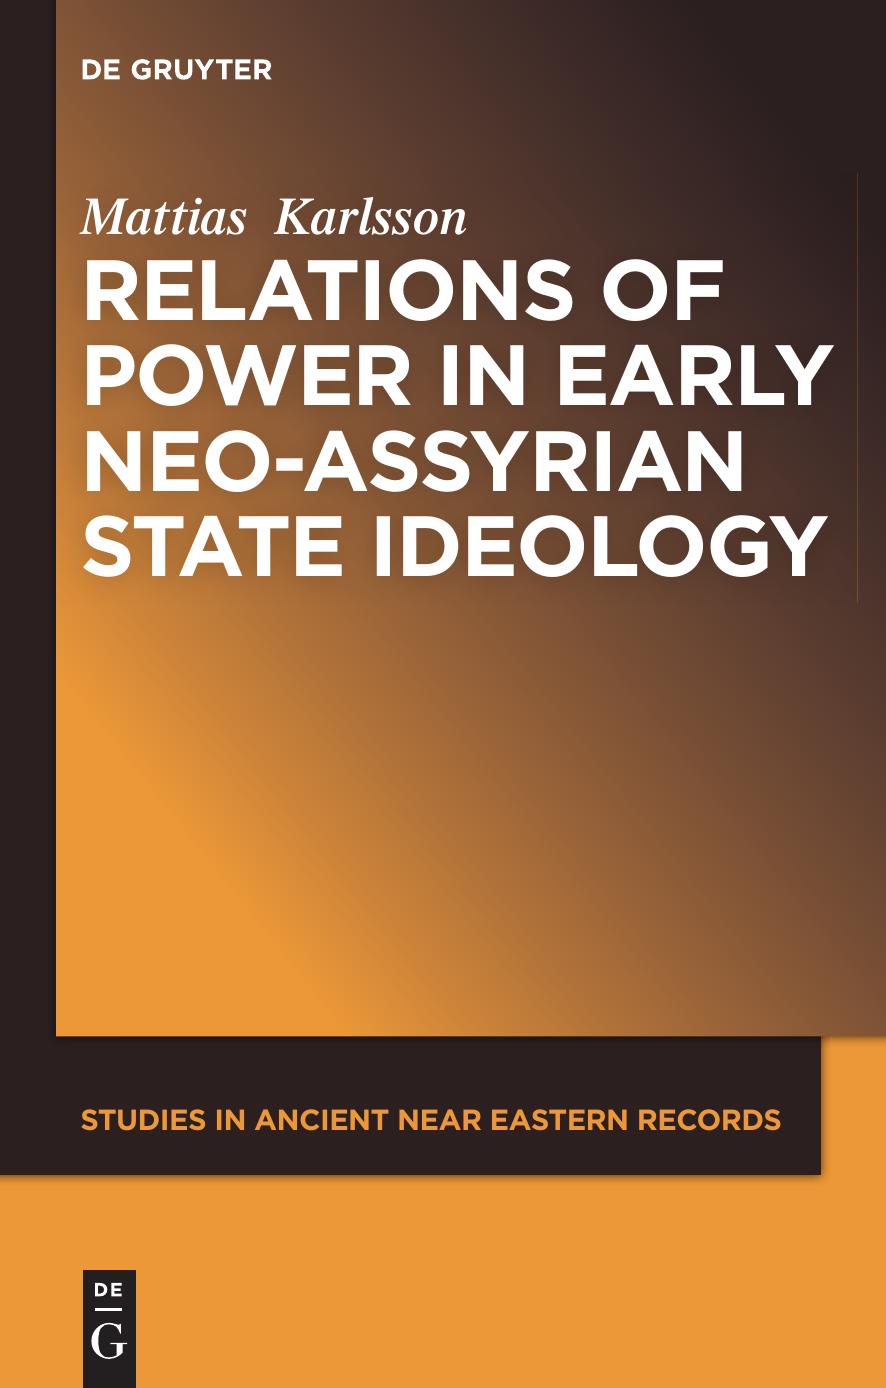 Relations of Power in Early Neo-Assyrian State Ideology by Mattias Karlsson